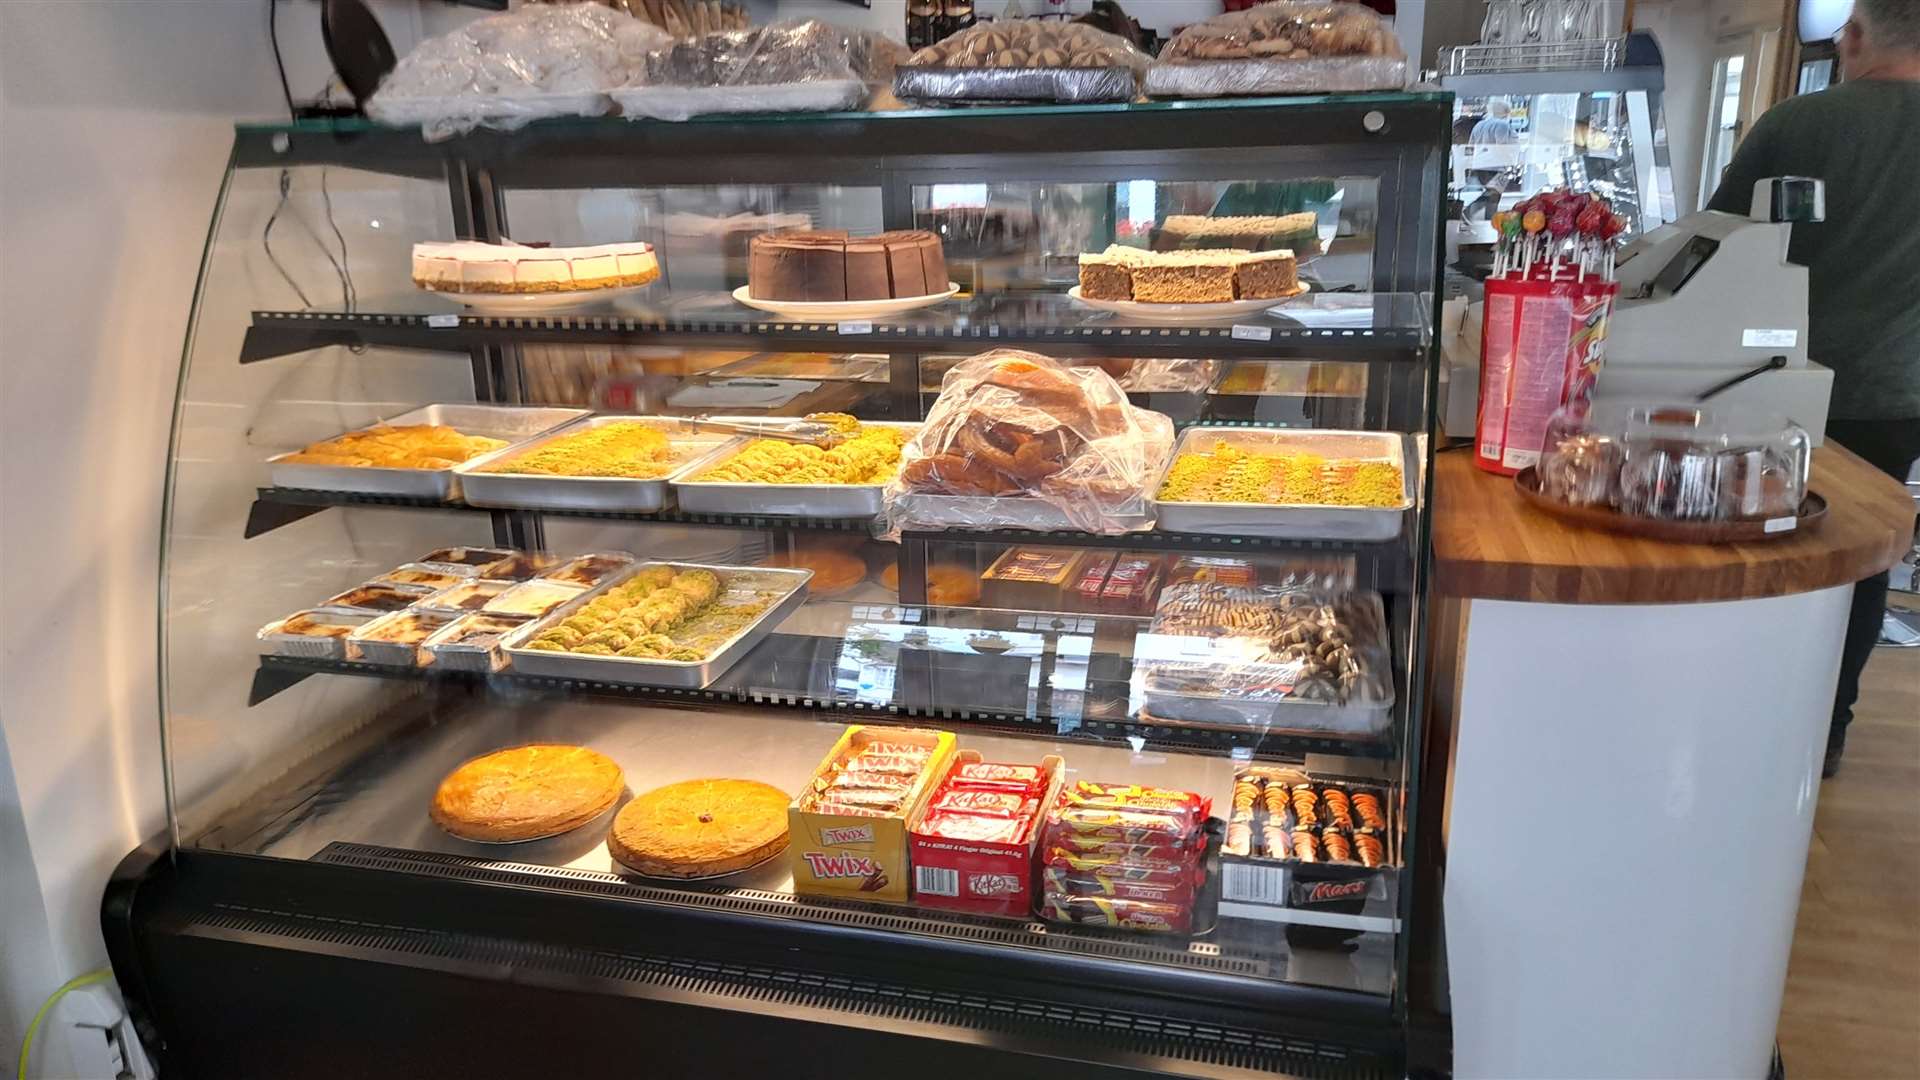 A whole range of pastries, snacks and food are on offer at the Taste of Cyprus cafe